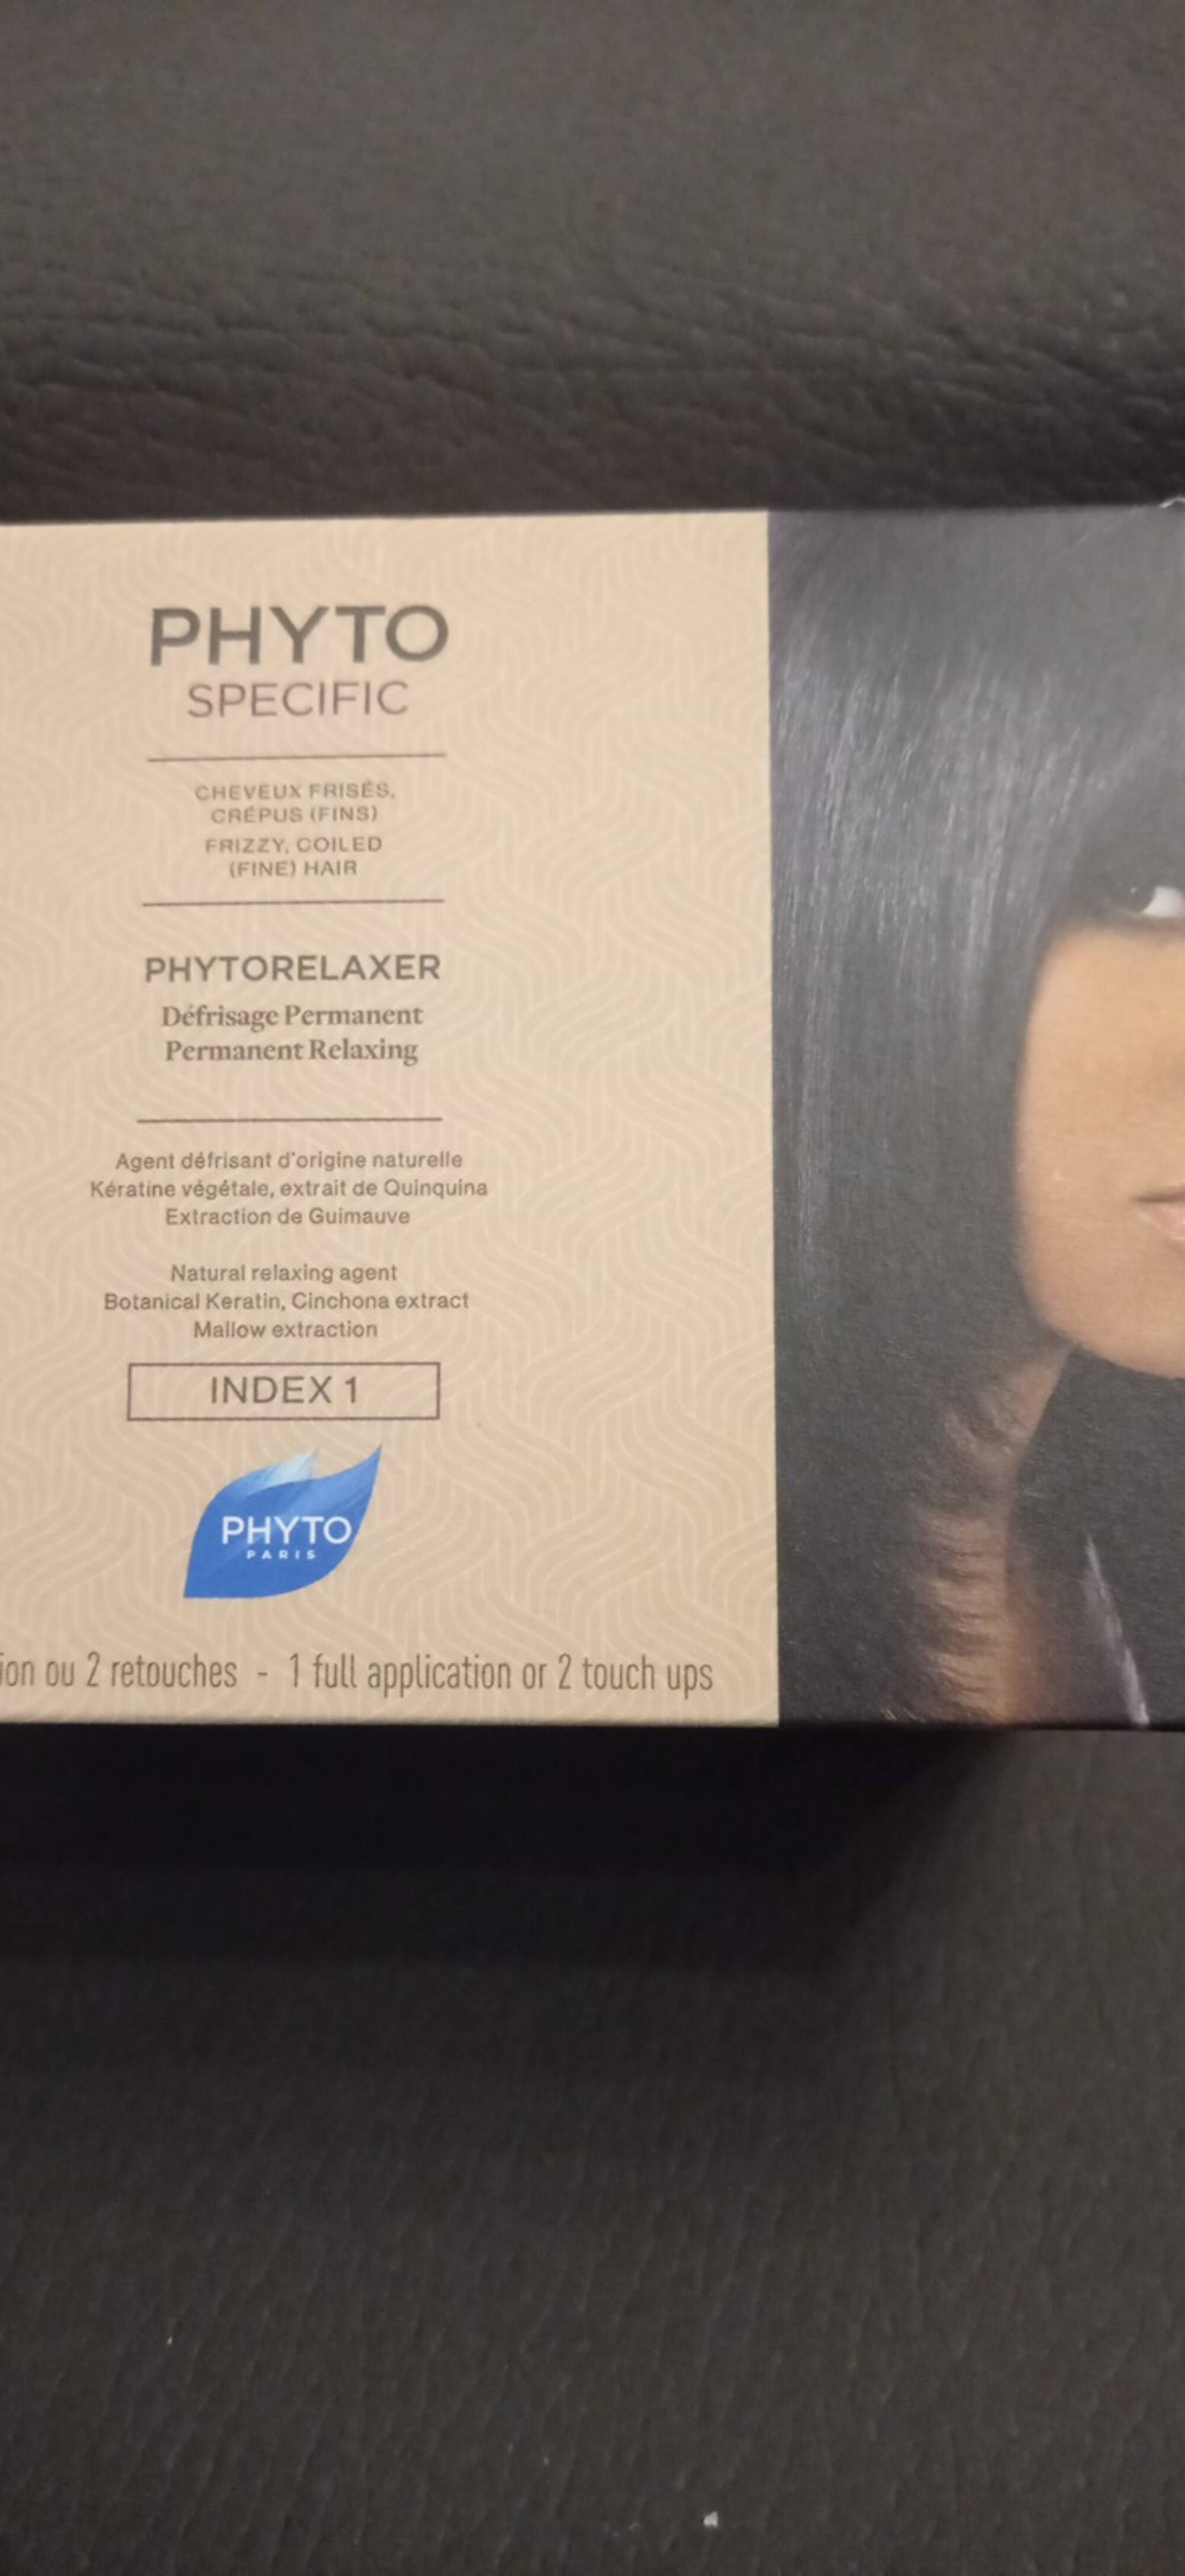 PHYTO - Phytorelaxer - Défrisage permanent